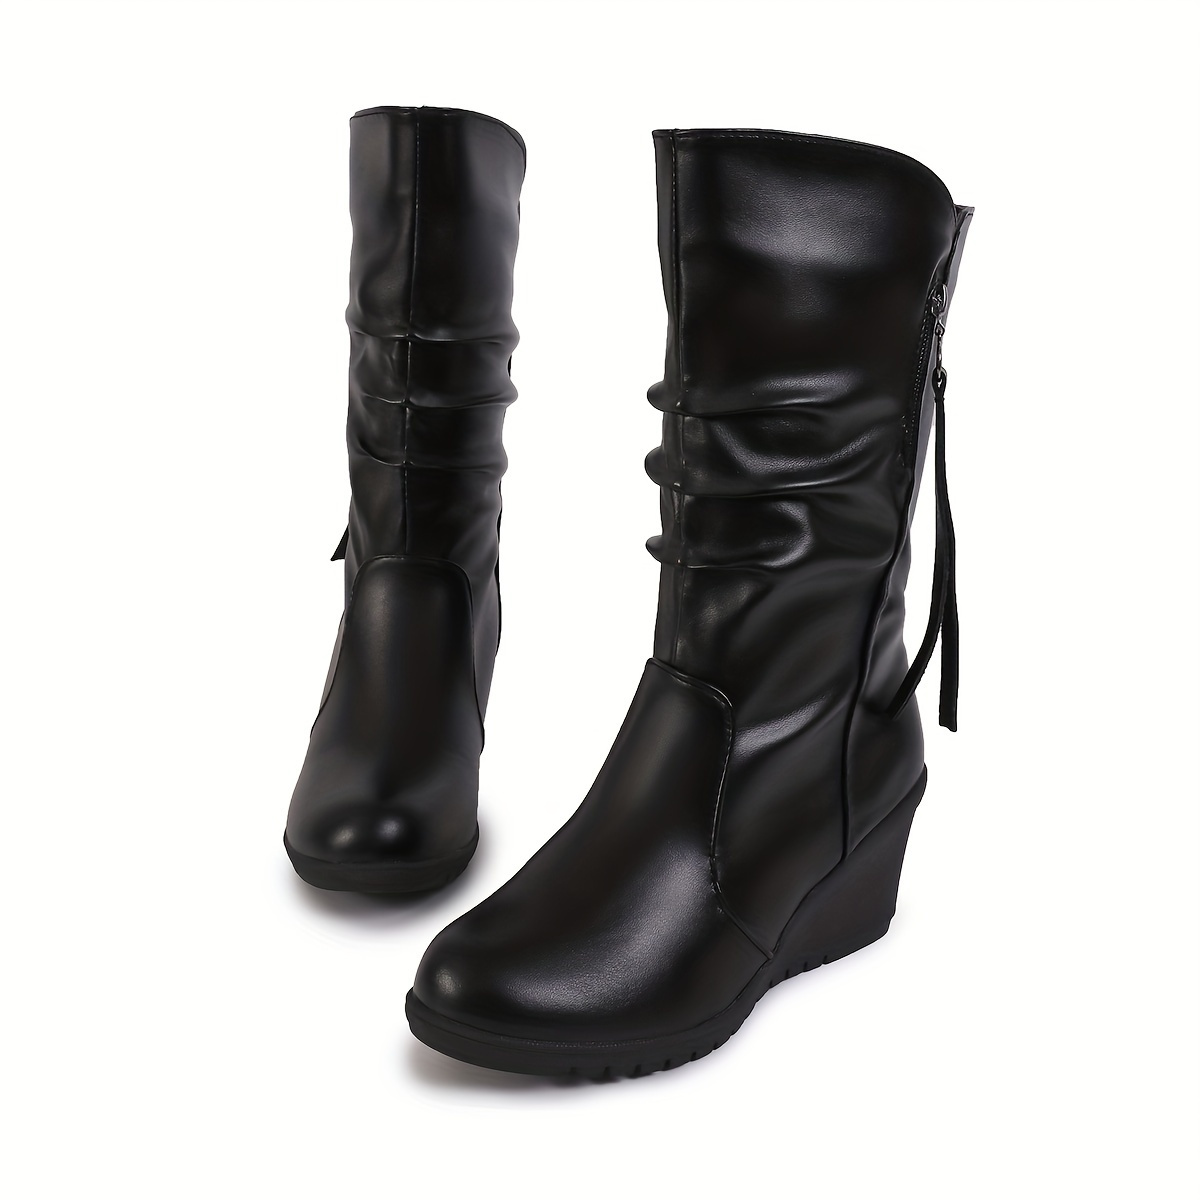 

Women's Wedge Mid Calf Boots, Slouchy Round Toe Side Zipper Shoes, All-match Fashion Boots